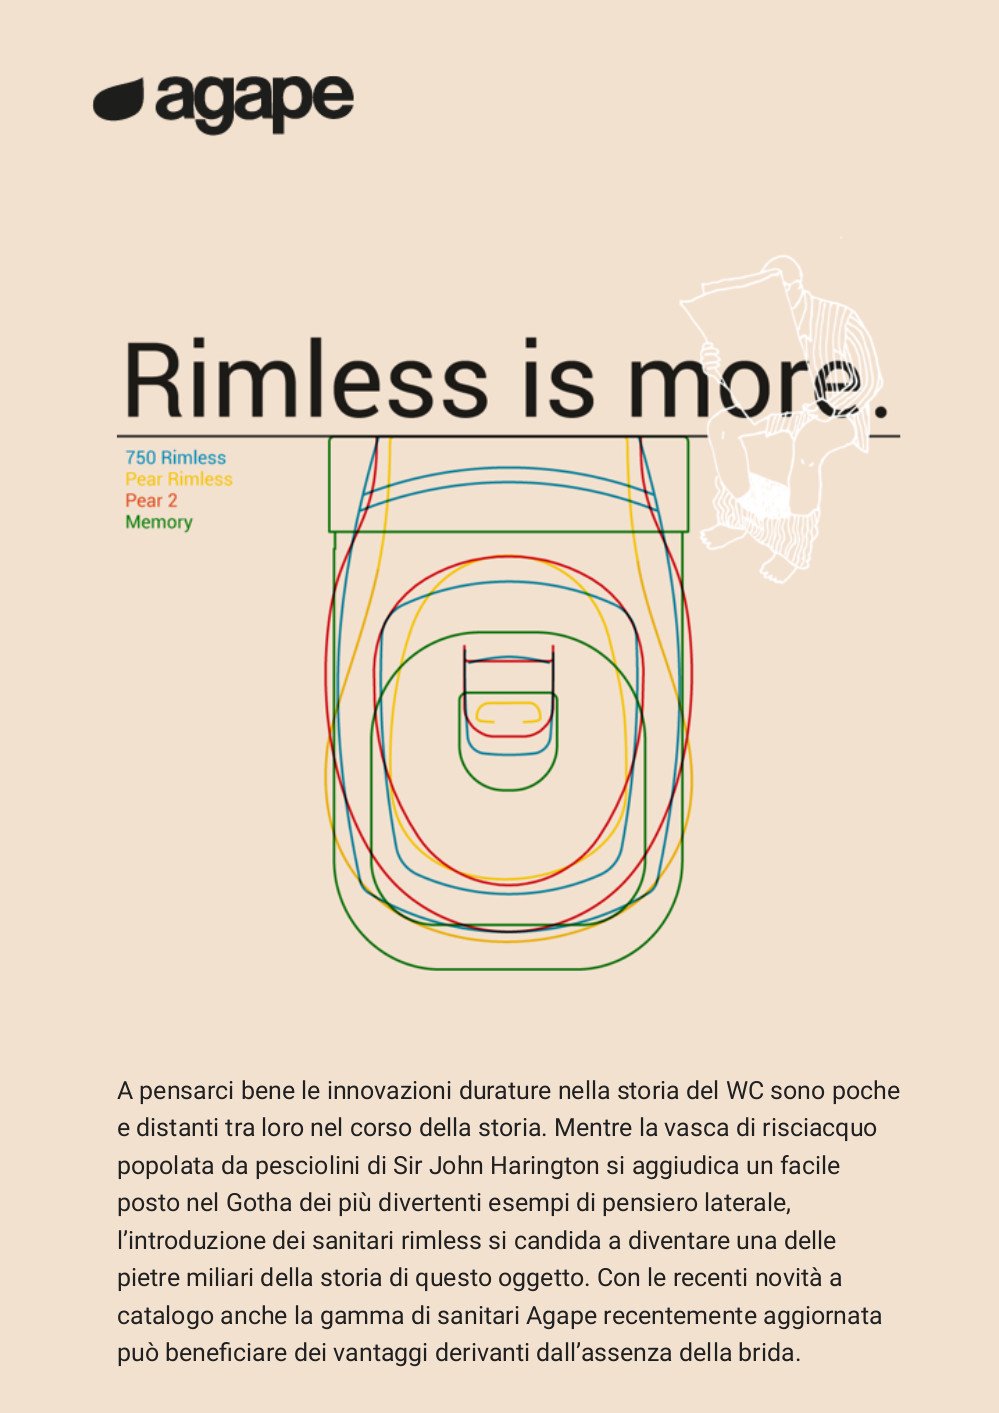 Rimless is more (it)